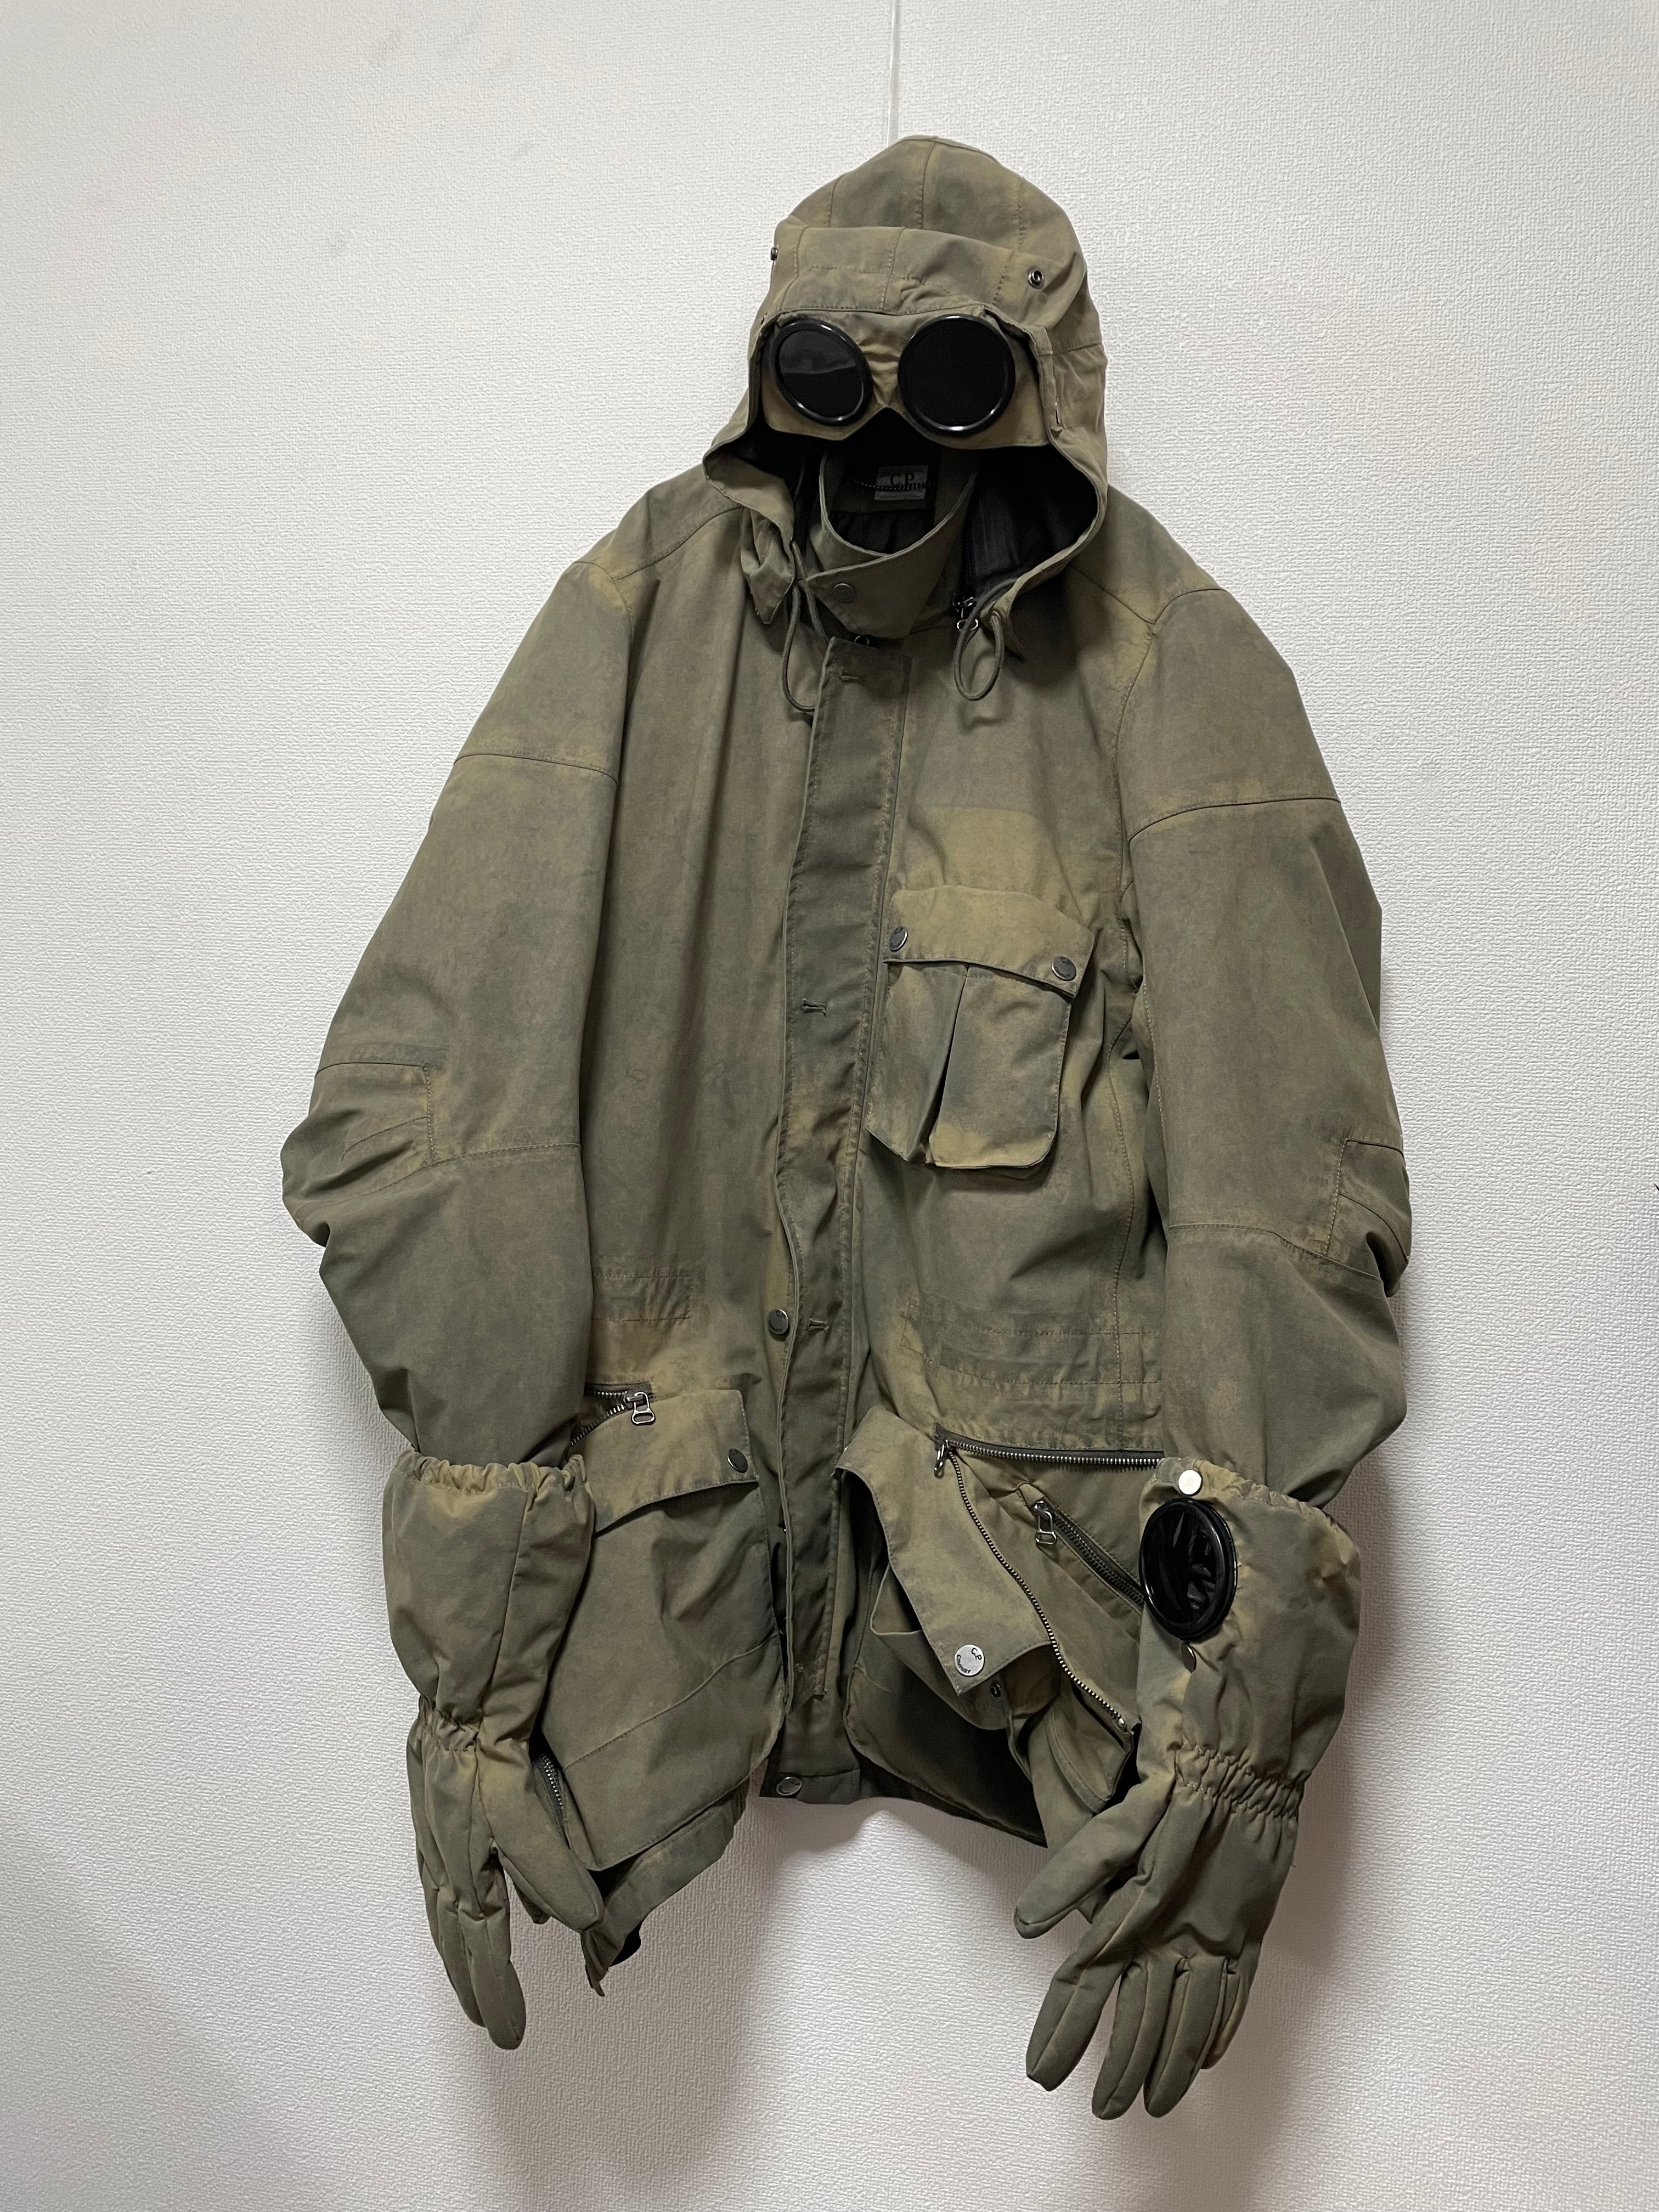 John galliano archive military witch jacket | HLVTC archives